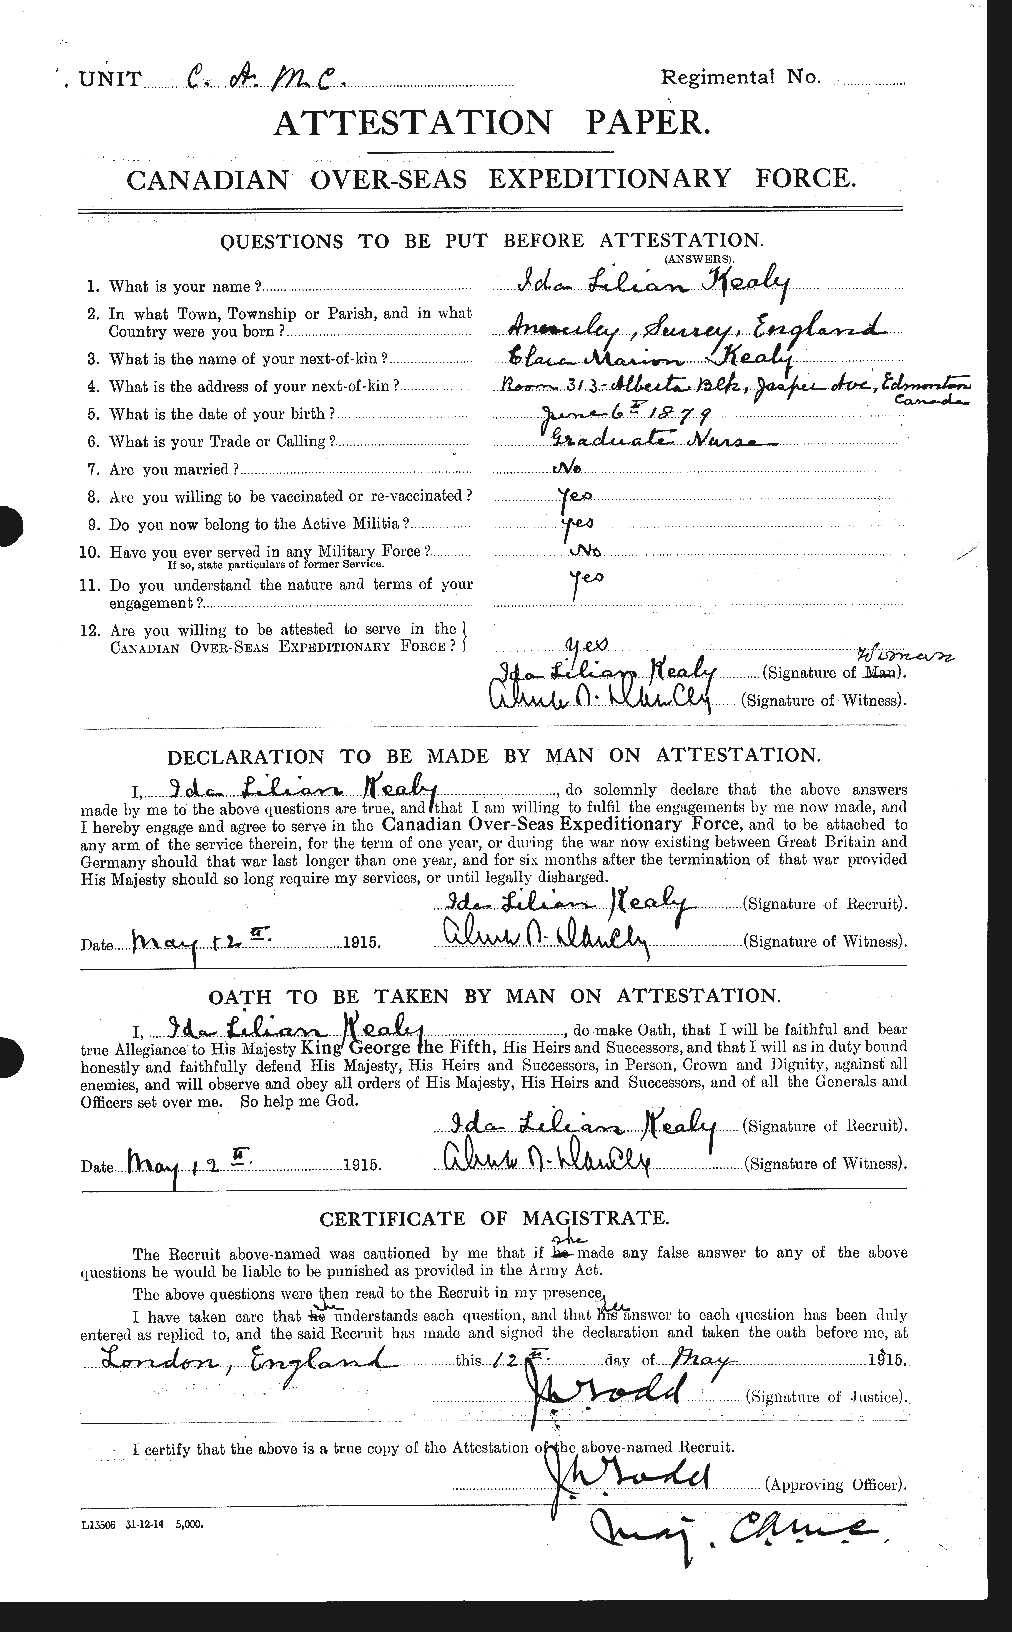 Personnel Records of the First World War - CEF 427910a